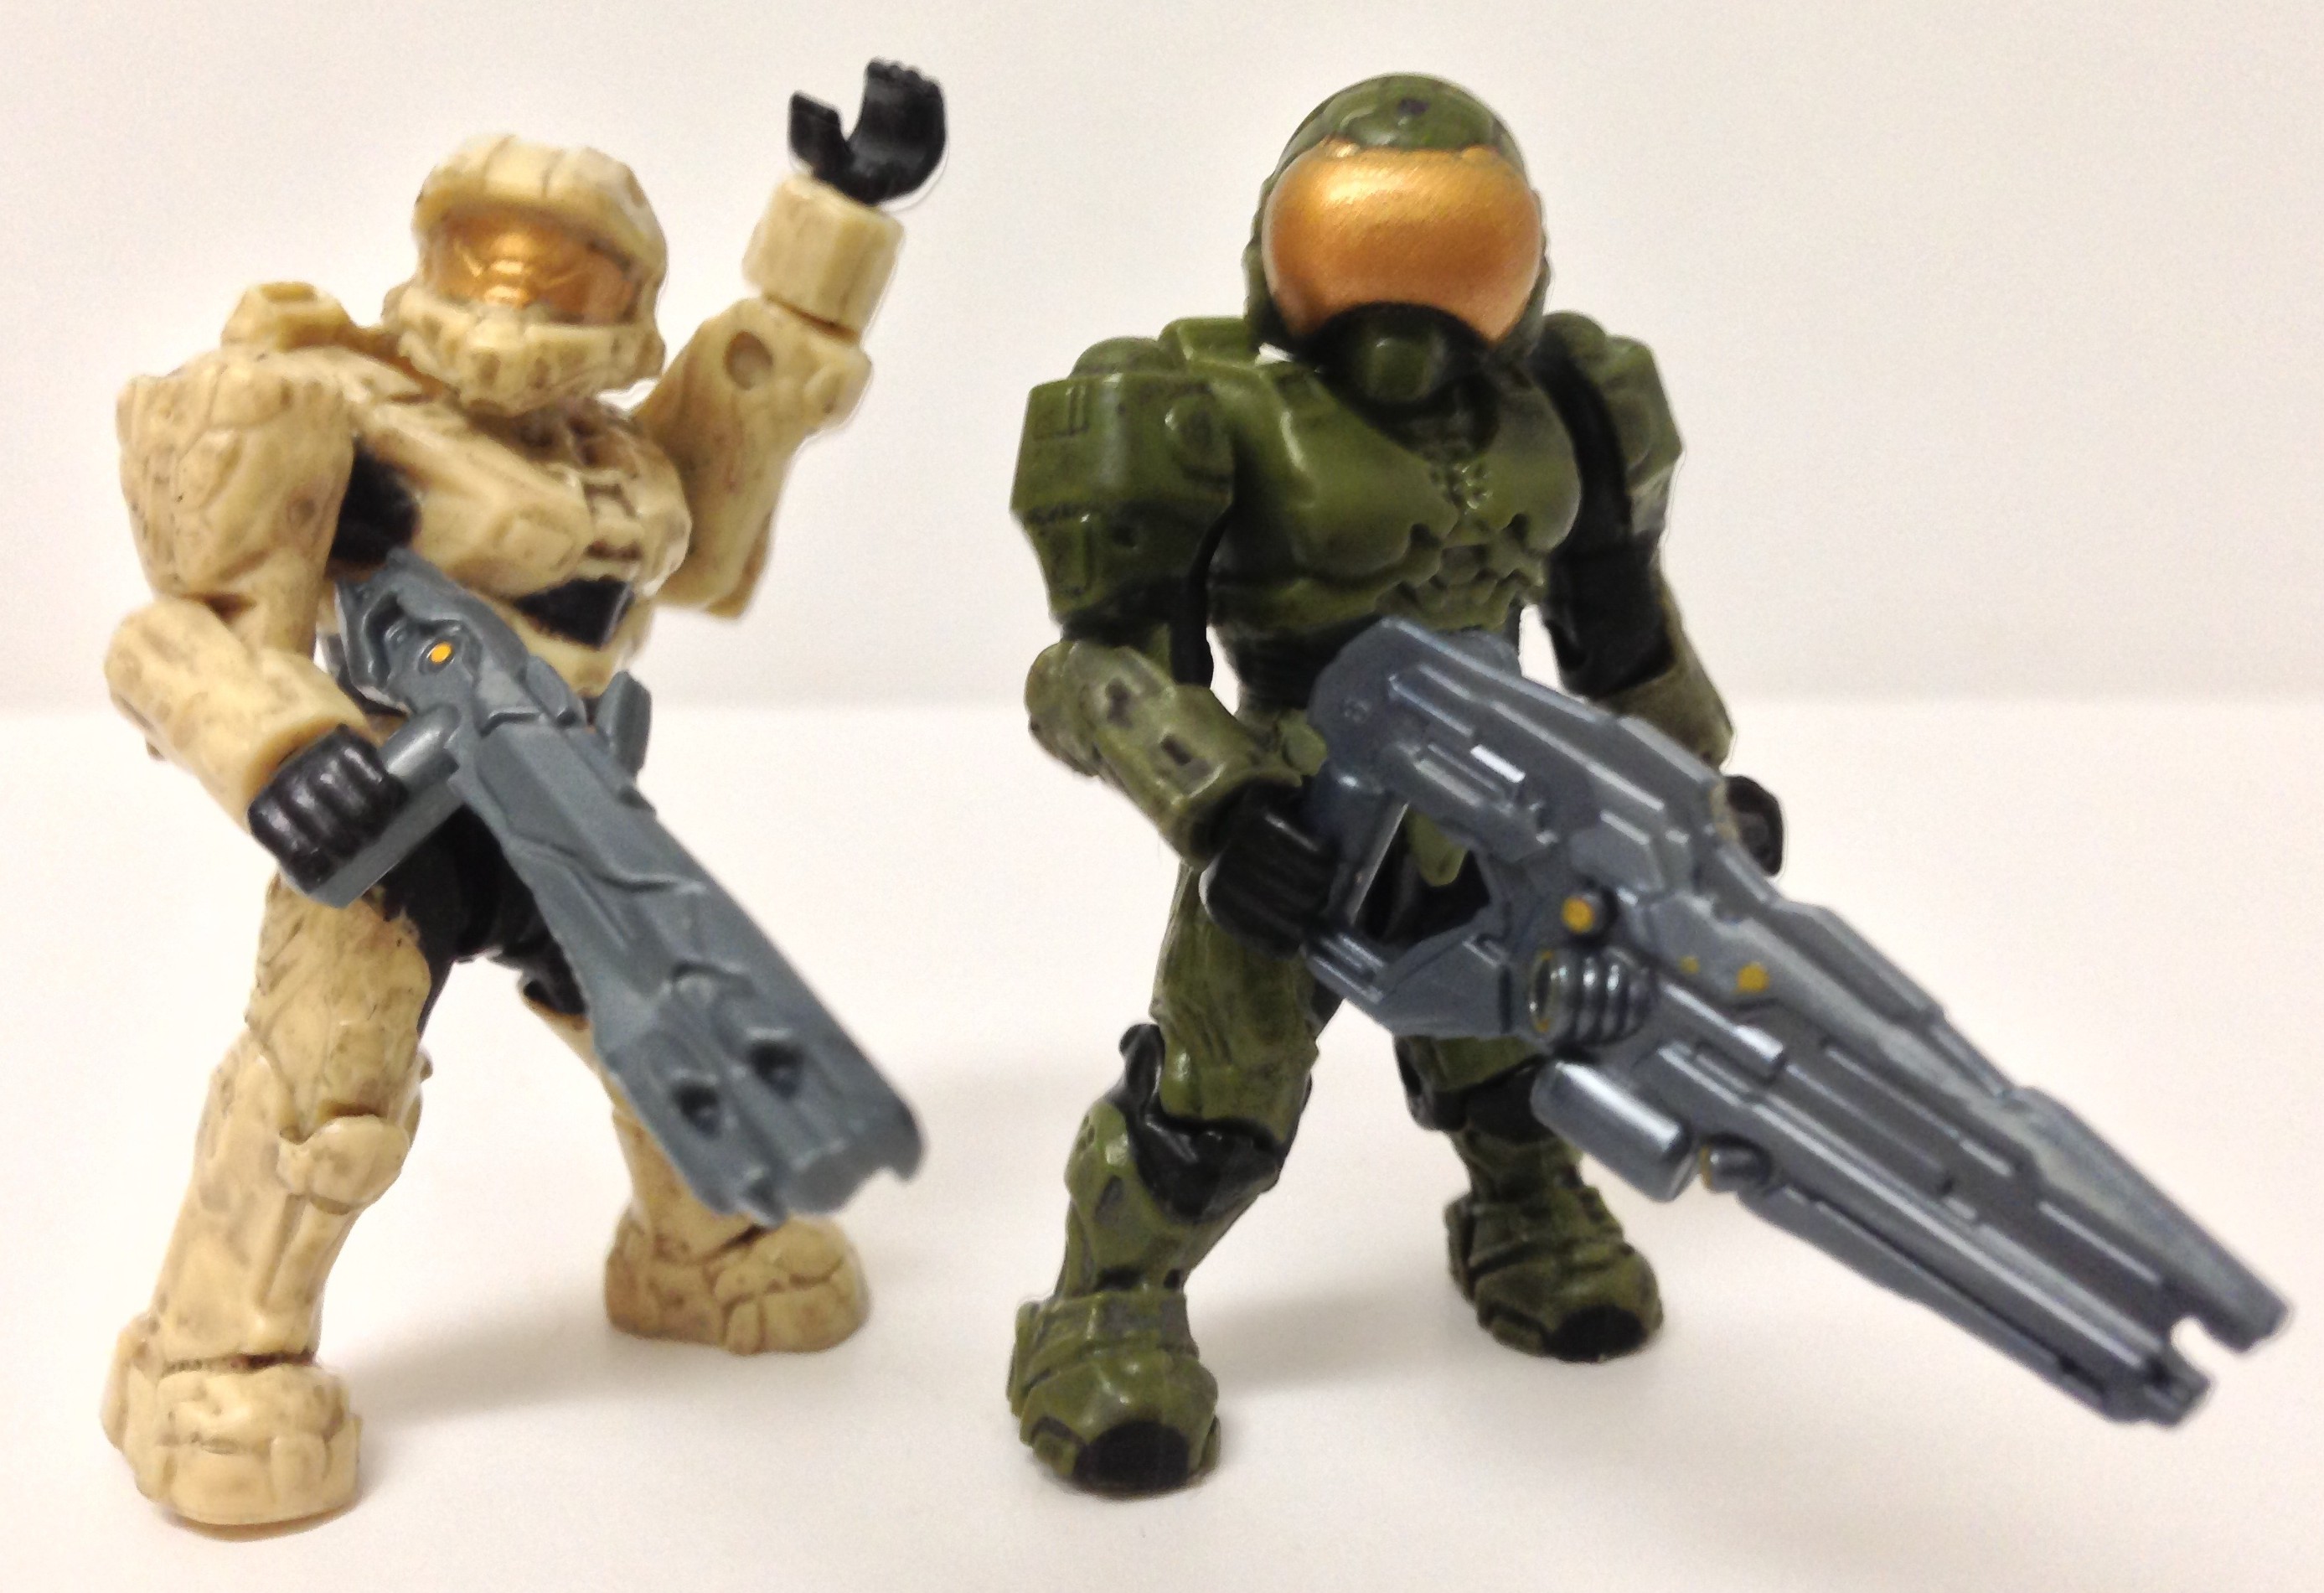 Halo Mega Bloks Forerunner Weapons Pack 97166 Review - Halo Toy News